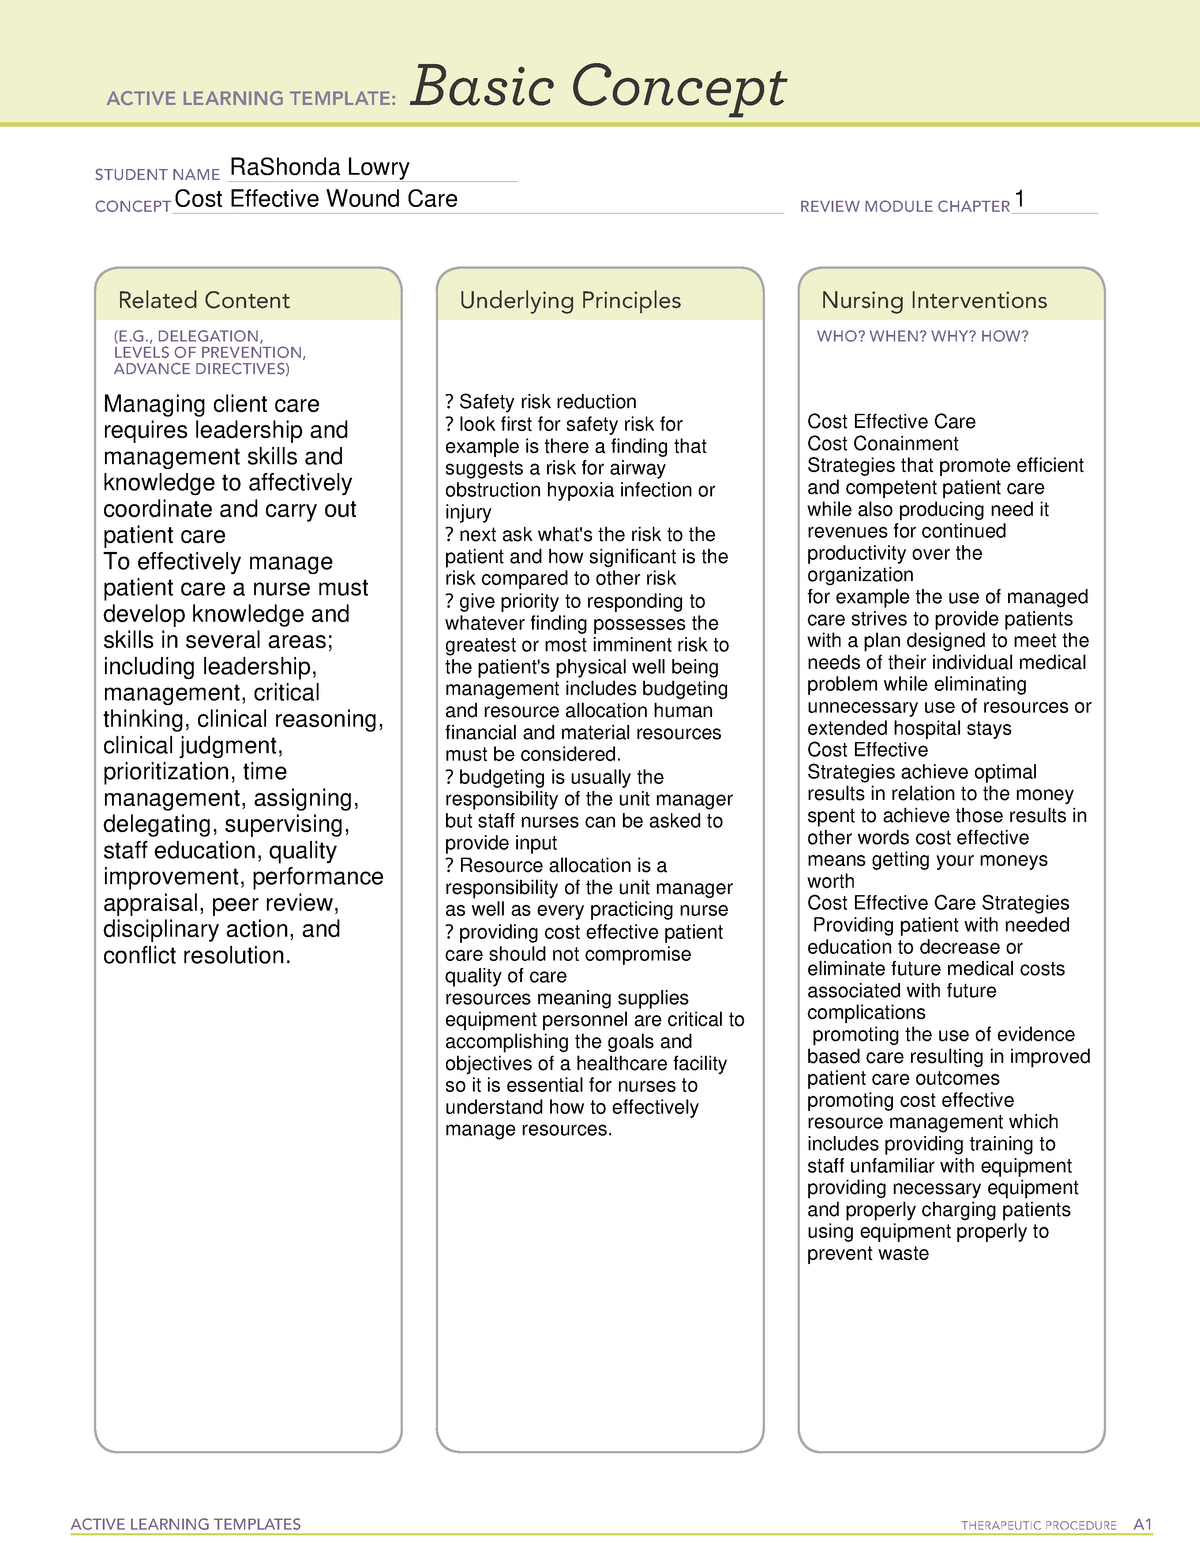 Cost Effective Care ATI Template ACTIVE LEARNING TEMPLATES